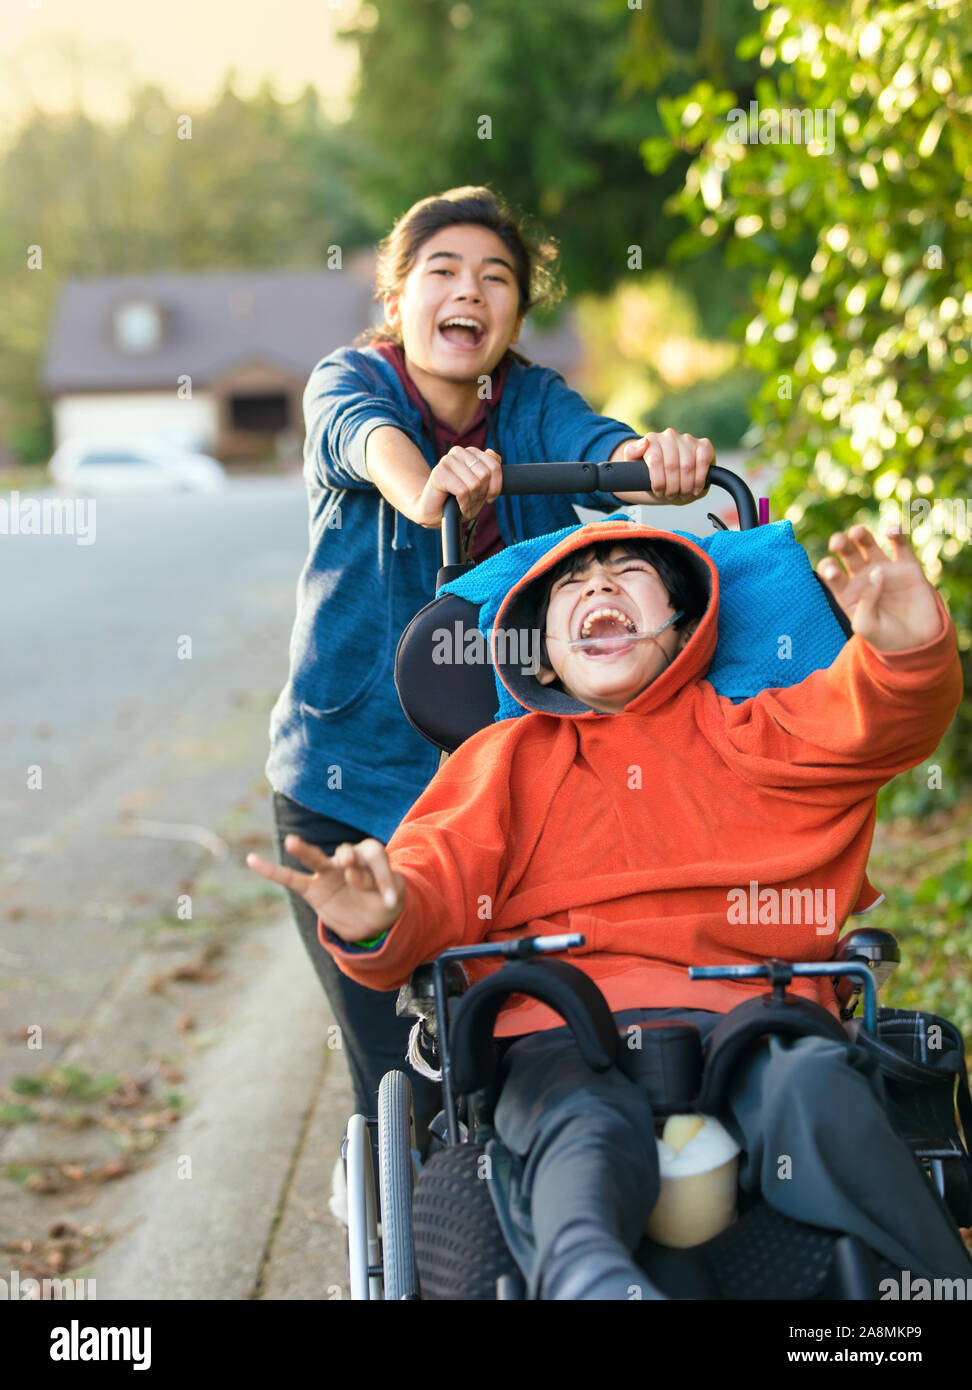 Teen girl running and smiling while pushing disabled little boy in wheelchair outdoors Stock Photo